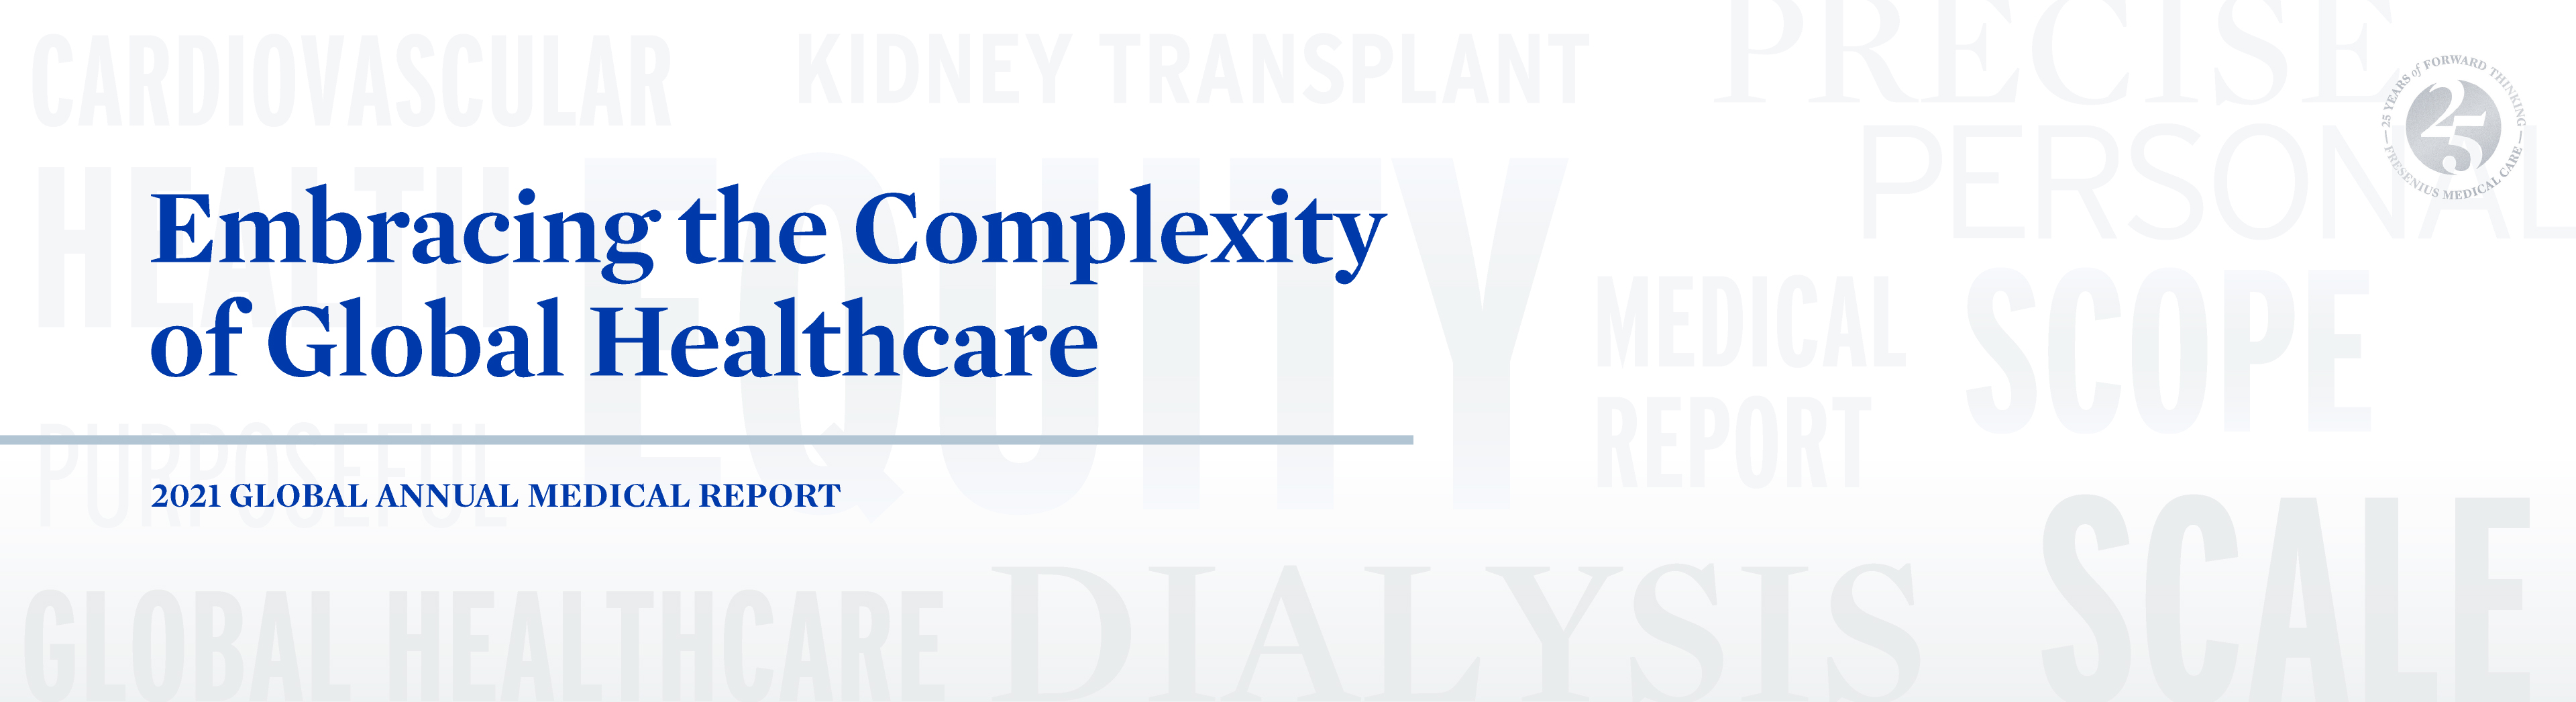 Embracing the Complexity of Global Healthcare